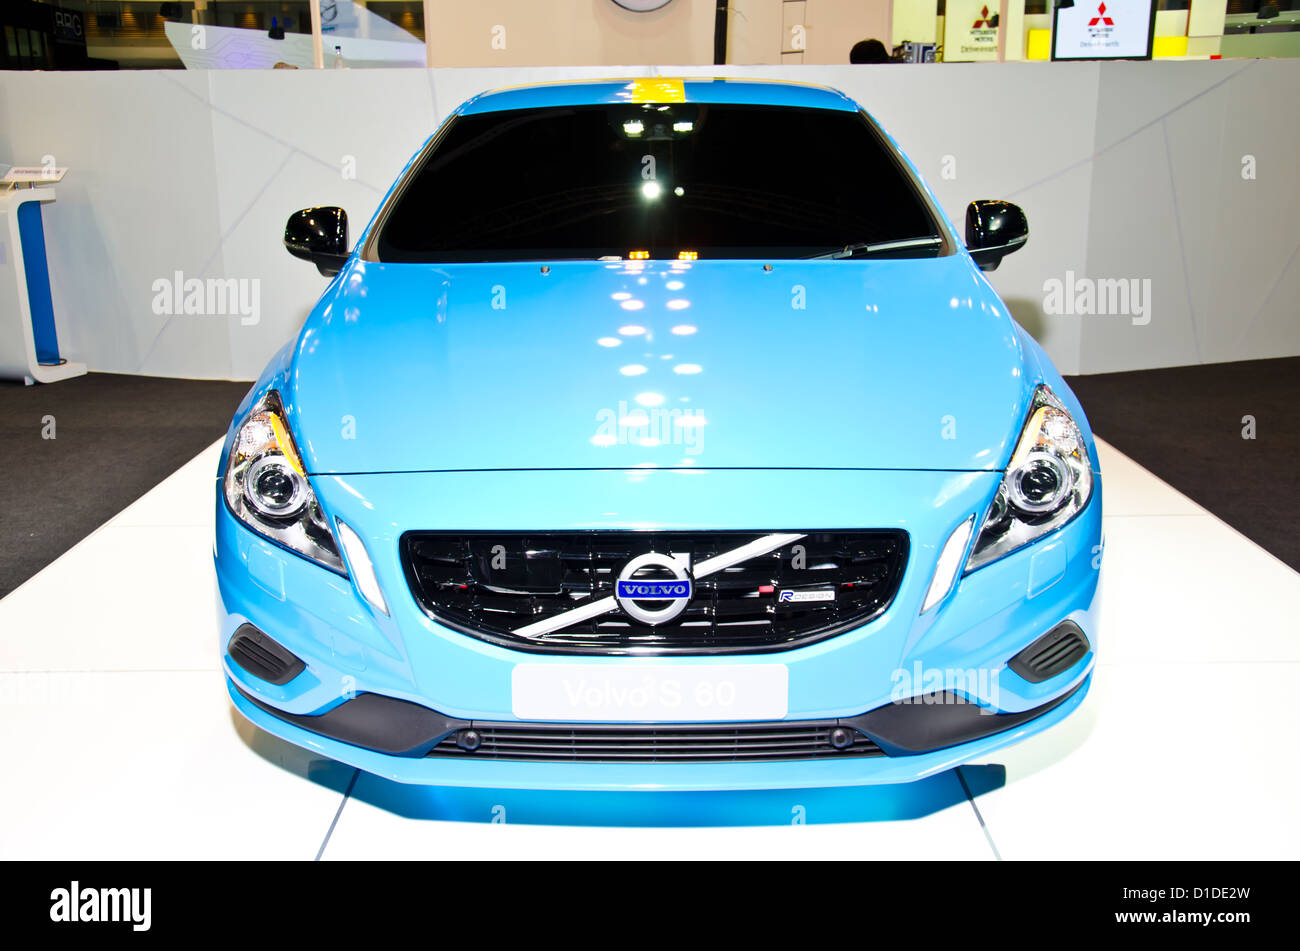 The Volvo S 60 car on display at The 29th Thailand International Motor Expo Stock Photo